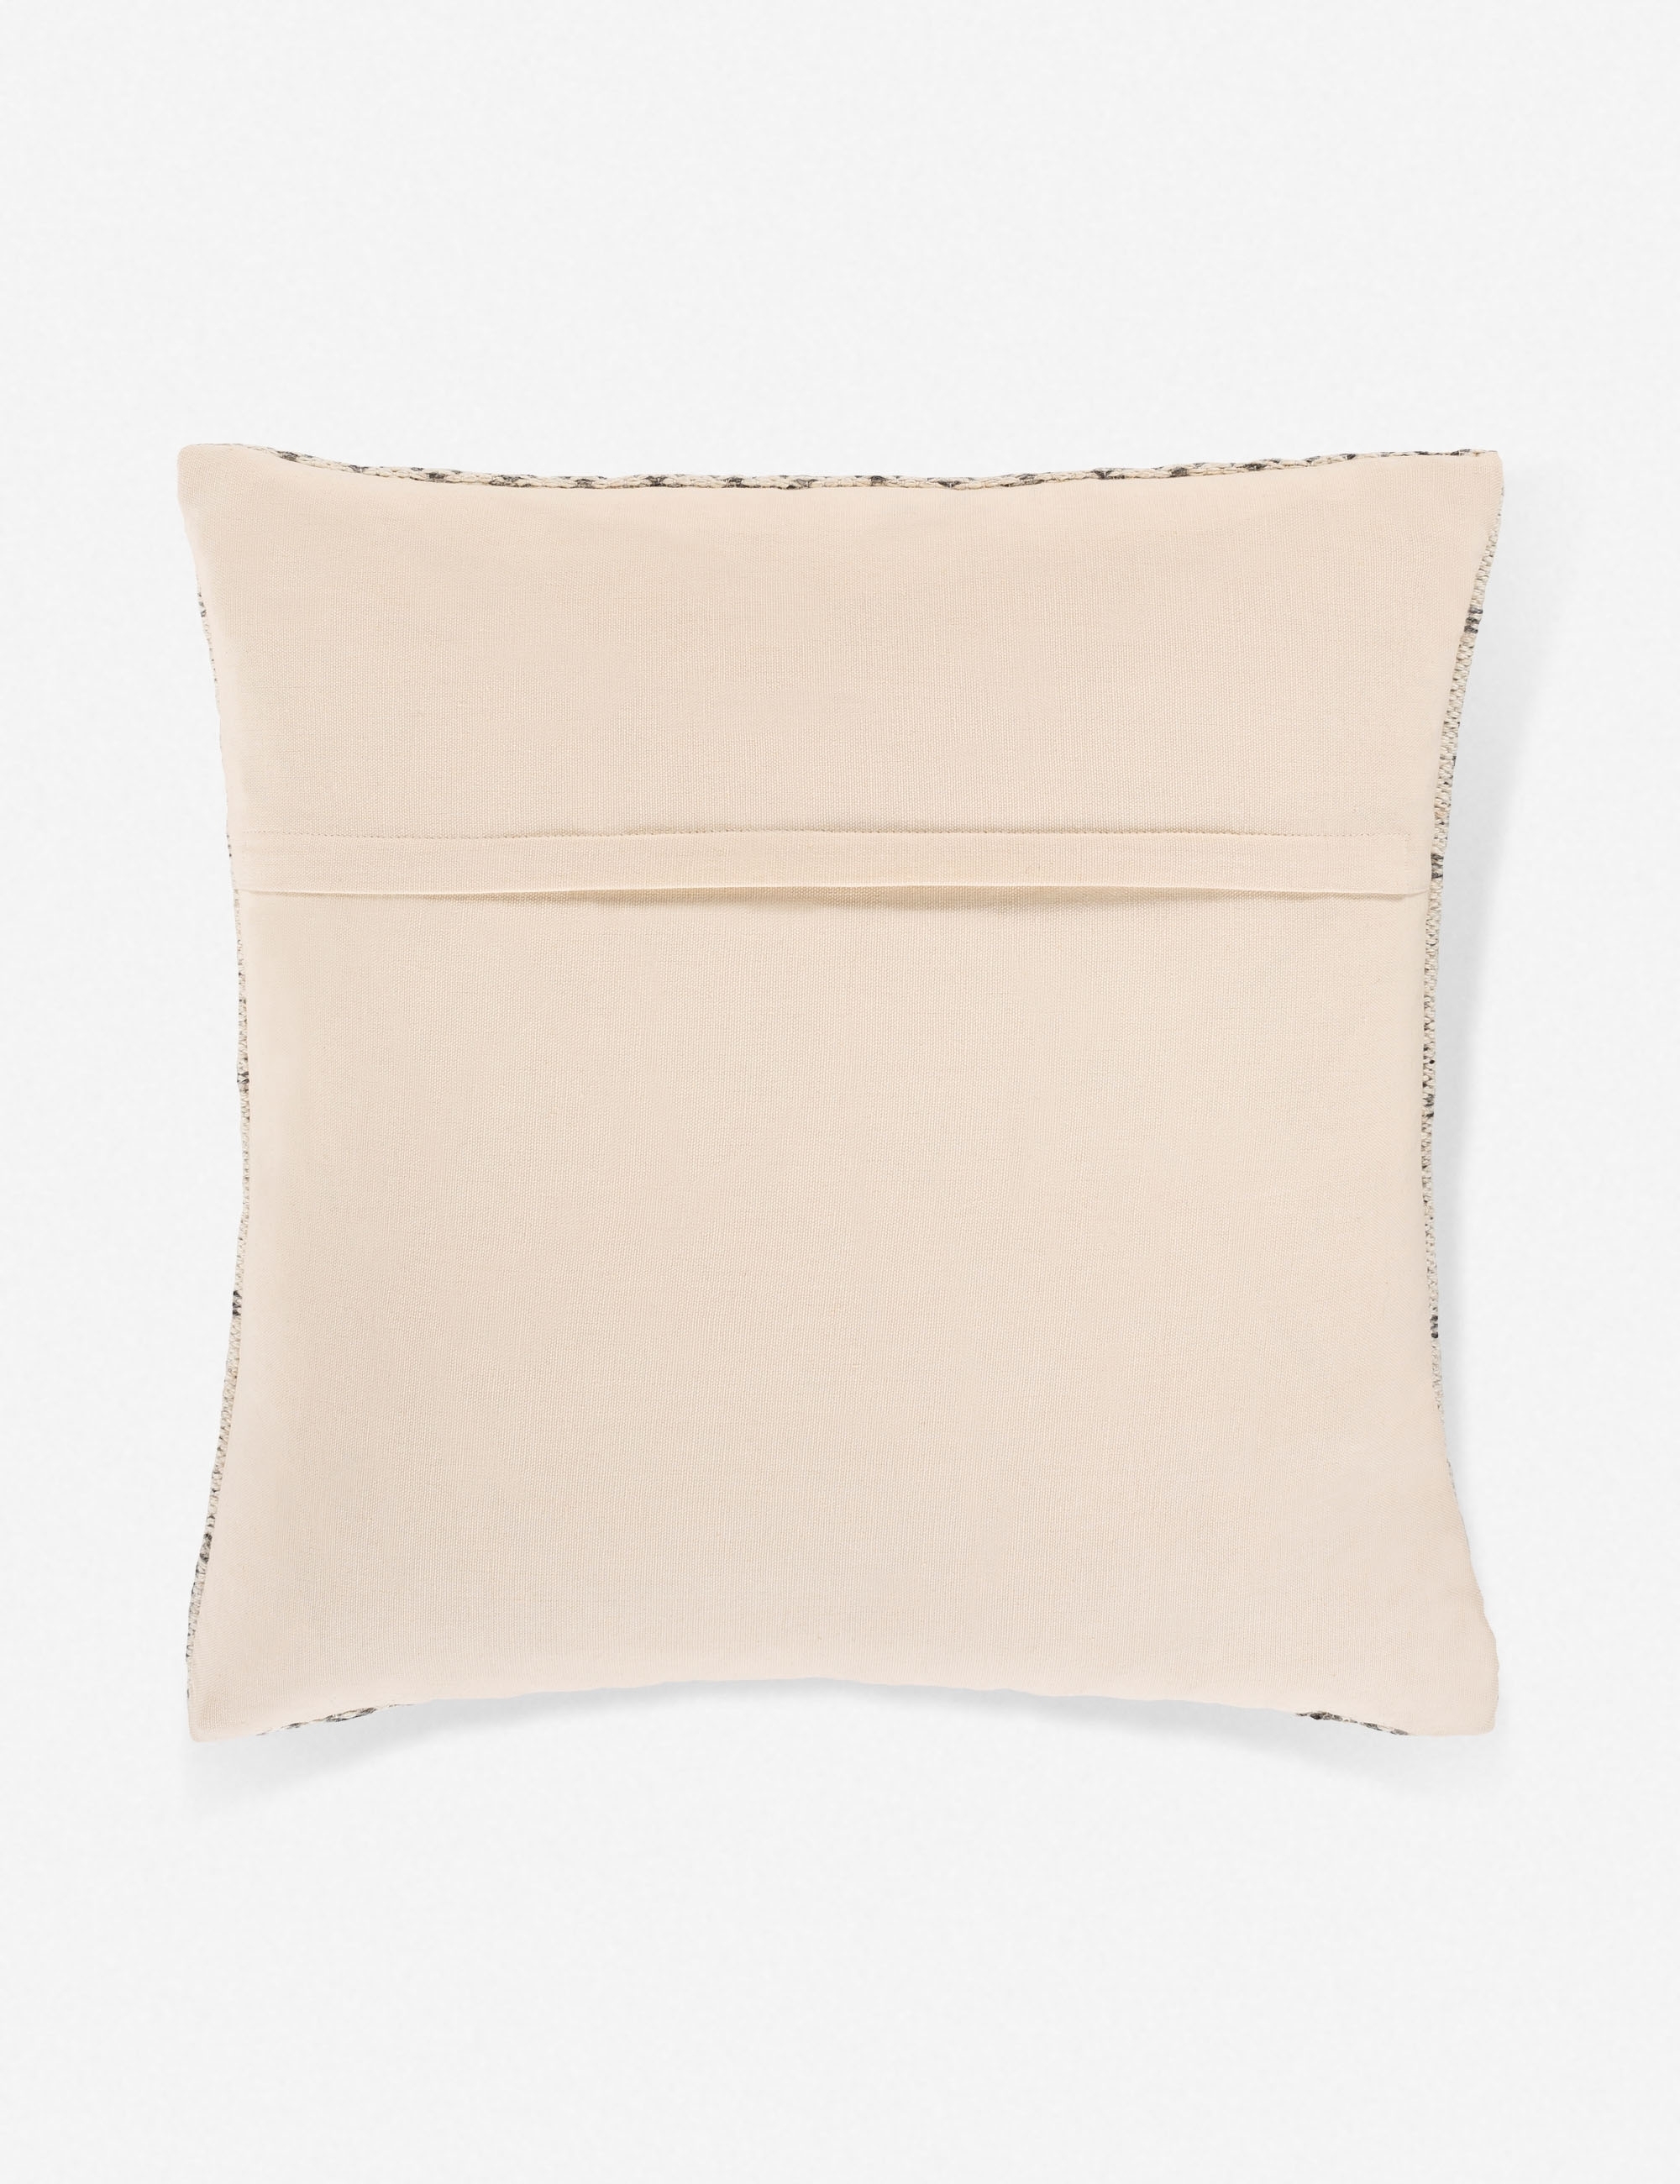 Nysa Pillow, Charcoal & Beige - Image 1